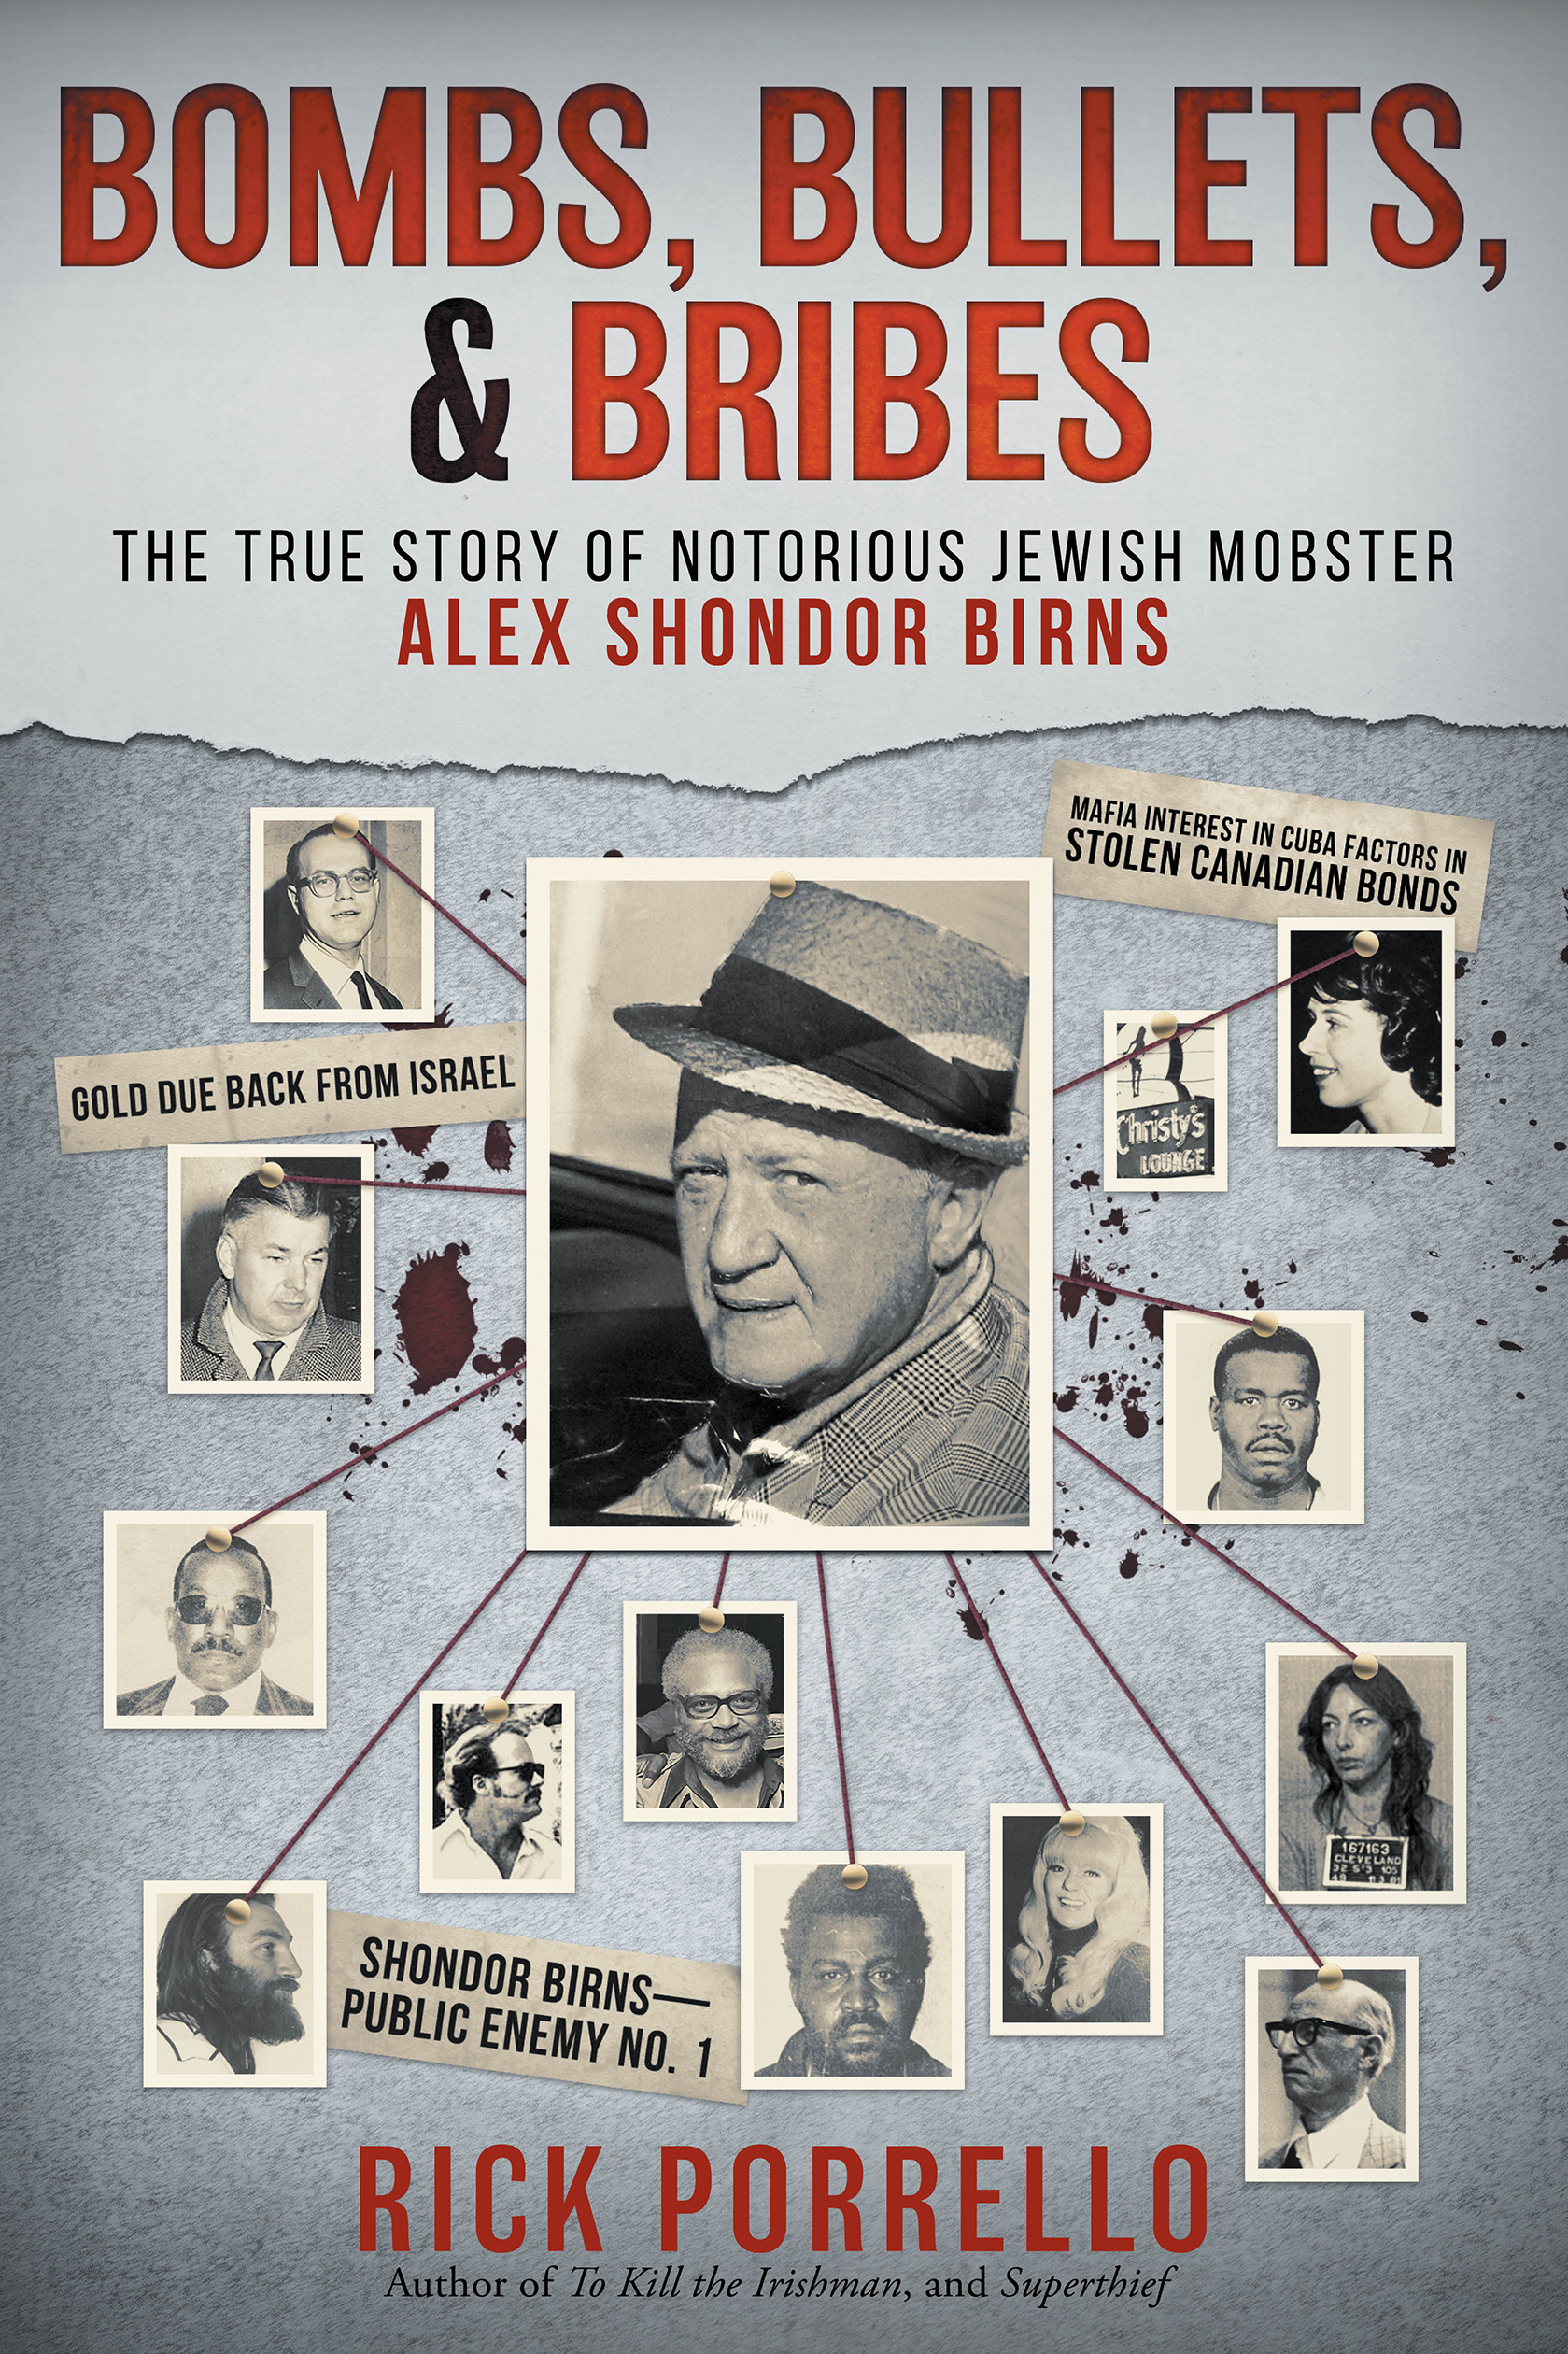 Bombs, Bullets, and Bribes – the true story of notorious Jewish mobster Alex Shondor Birns.